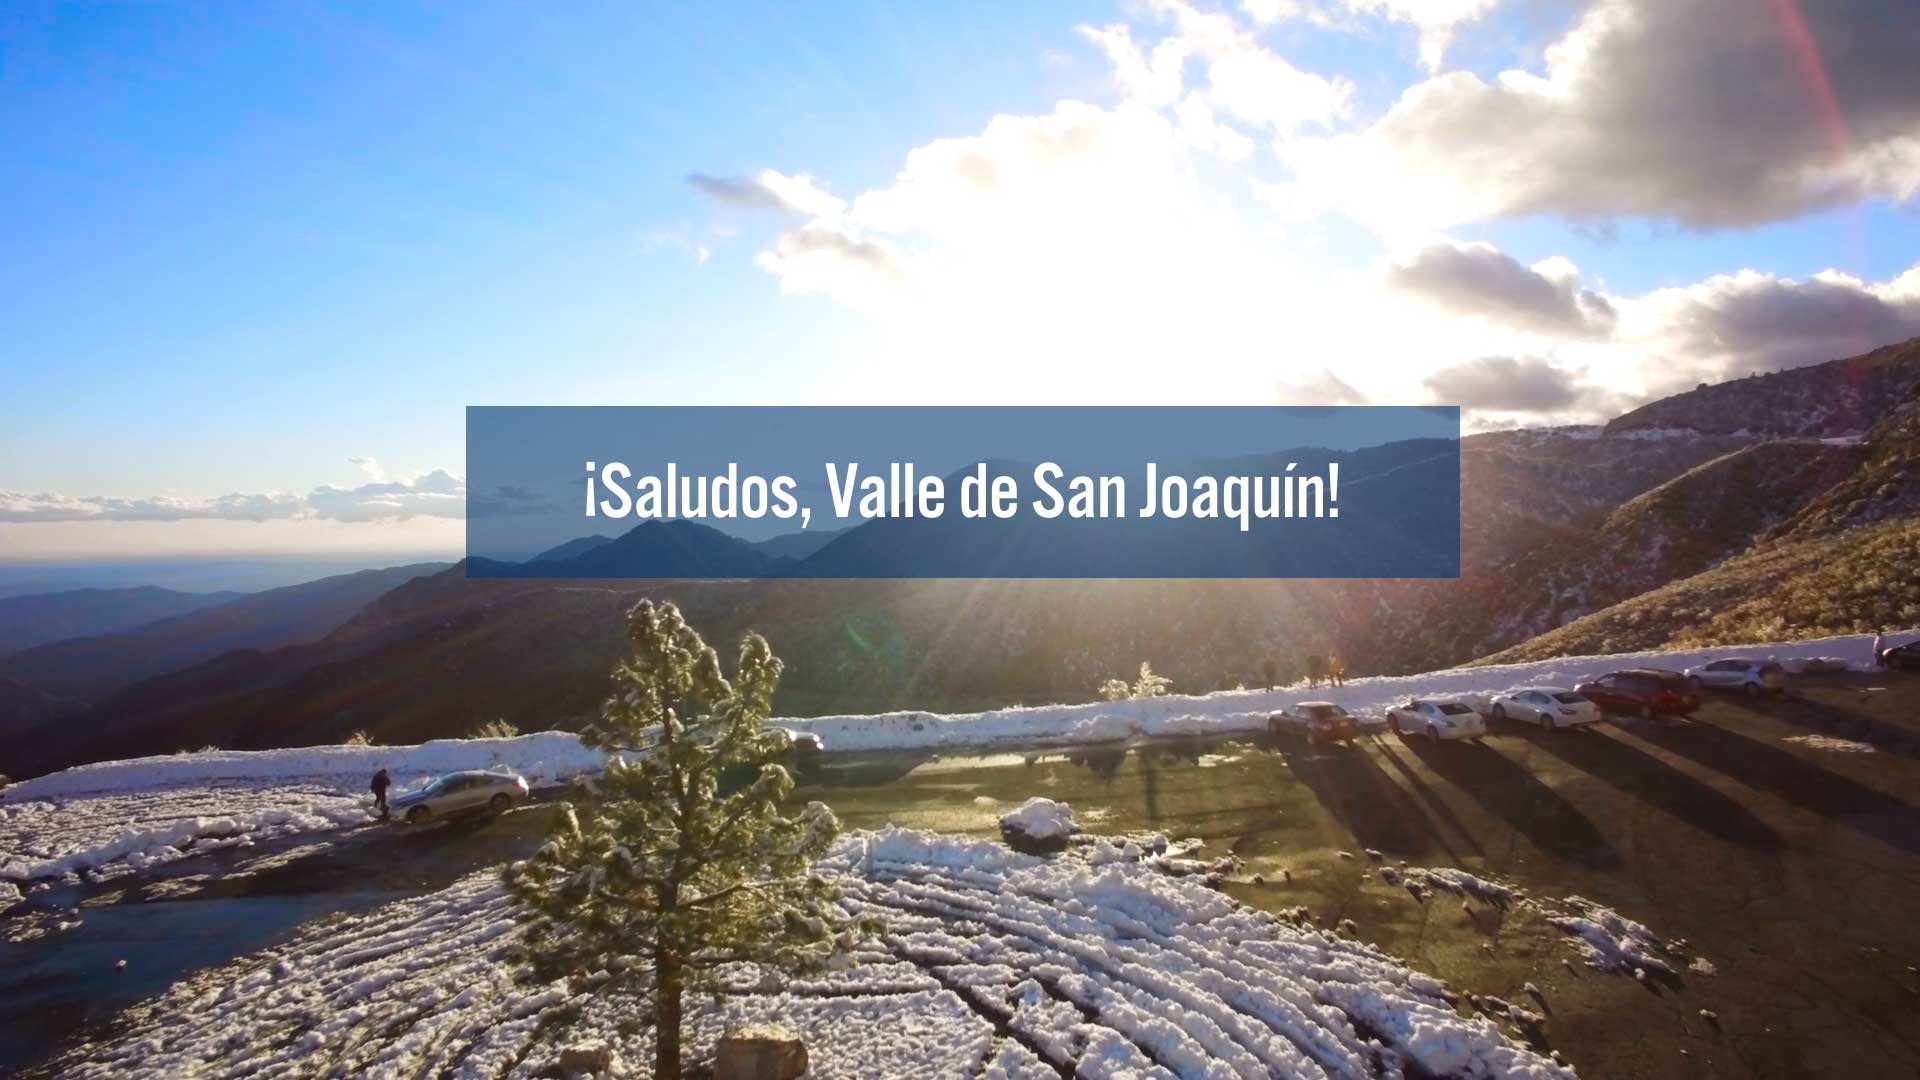 Video still depicting a scene from the San Joaquin Valley with a white-text title on a transparent blue box saying "Saludos, Valle de San Joaquin"